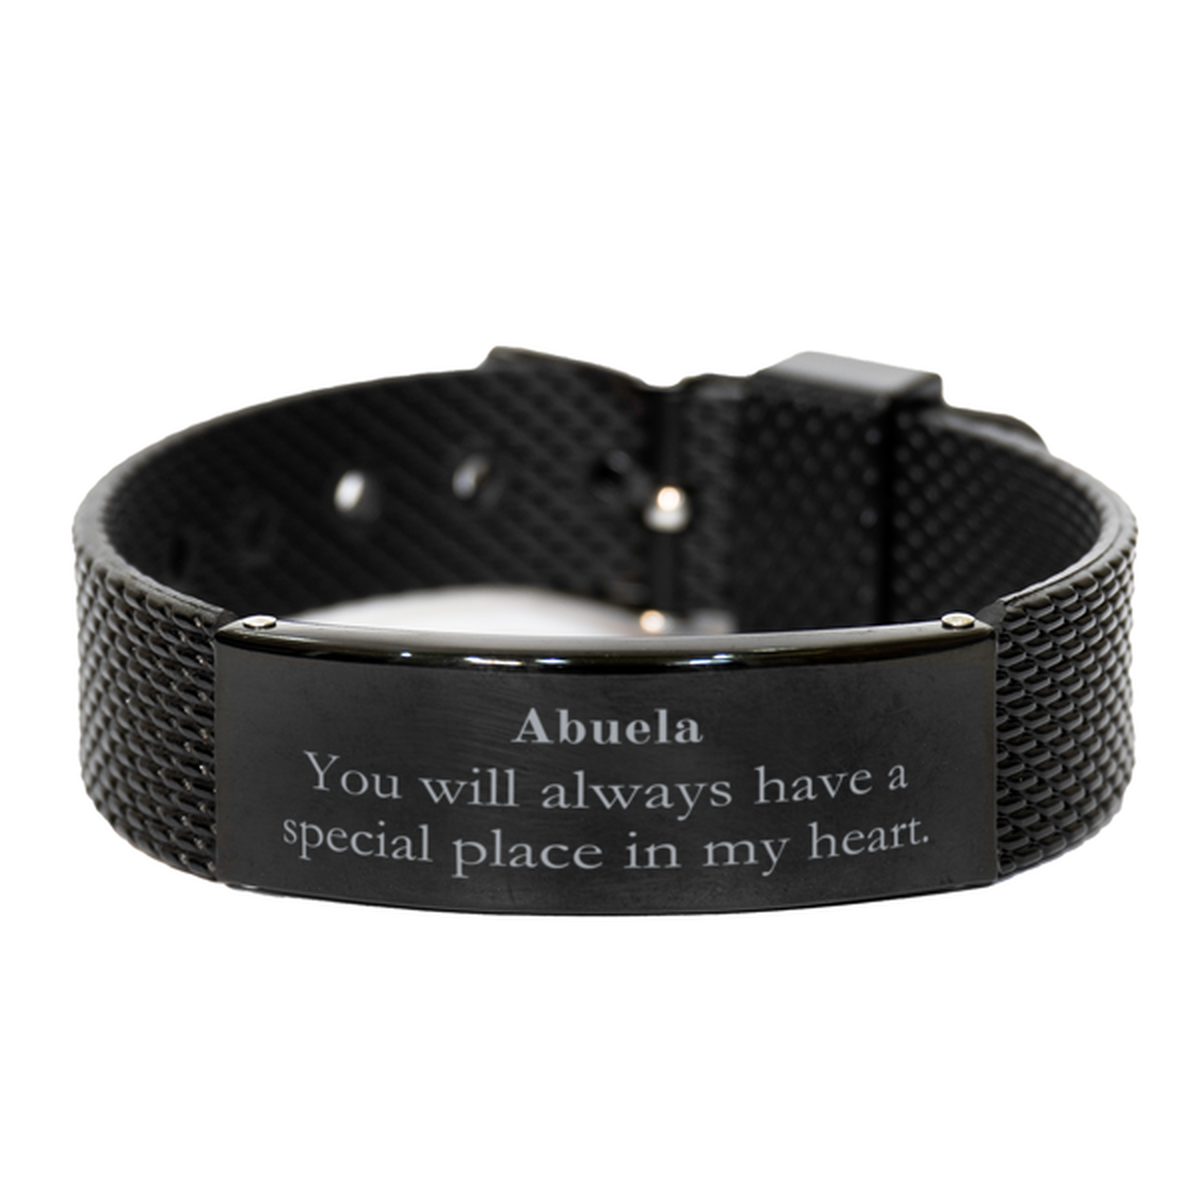 Abuela Black Shark Mesh Bracelet - You will always have a special place in my heart - Engraved Gift for Grandma - Birthday, Christmas, Mothers Day - Unique and Inspirational Jewelry for Abuela